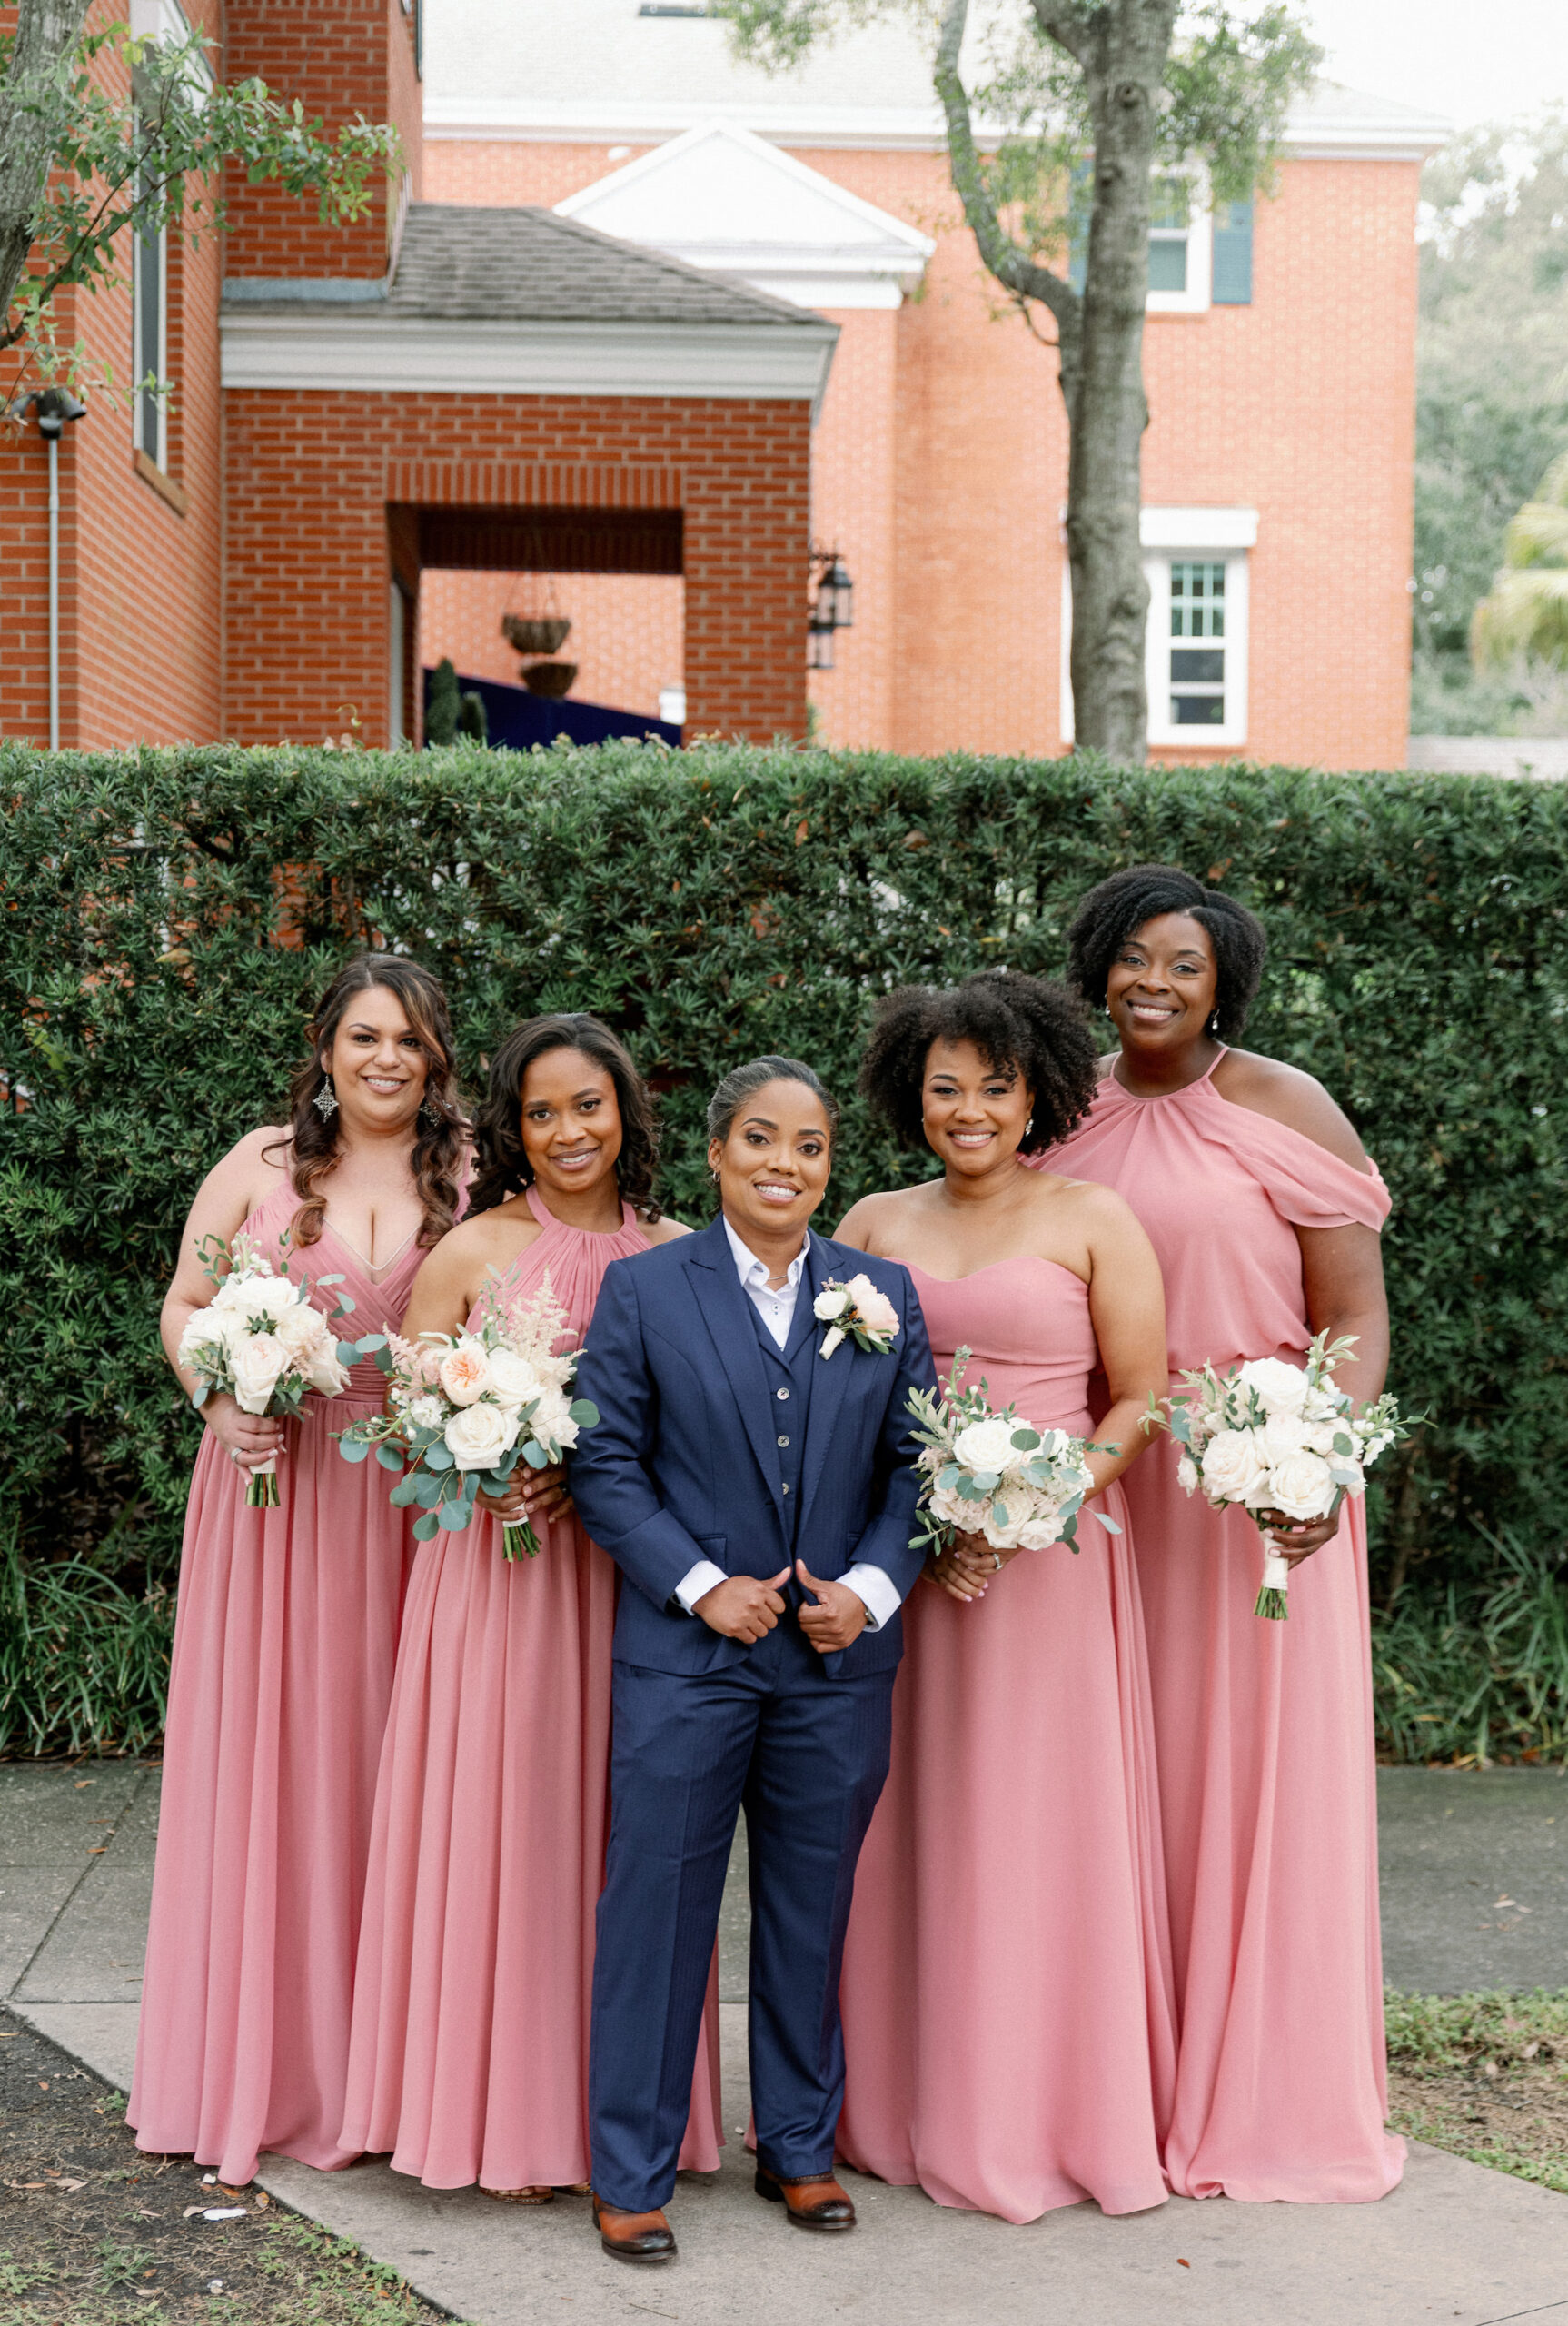 Same Sex Lesbian Wedding, Bride Wearing Blue Suit with Bridesmaids in Mix and Match Pink Dresses Holding Lush White and Greenery Floral Bouquets | Tampa Bay Wedding Photographer Dewitt for Love Photography | Wedding Hair and Makeup Imago Dei by Milan